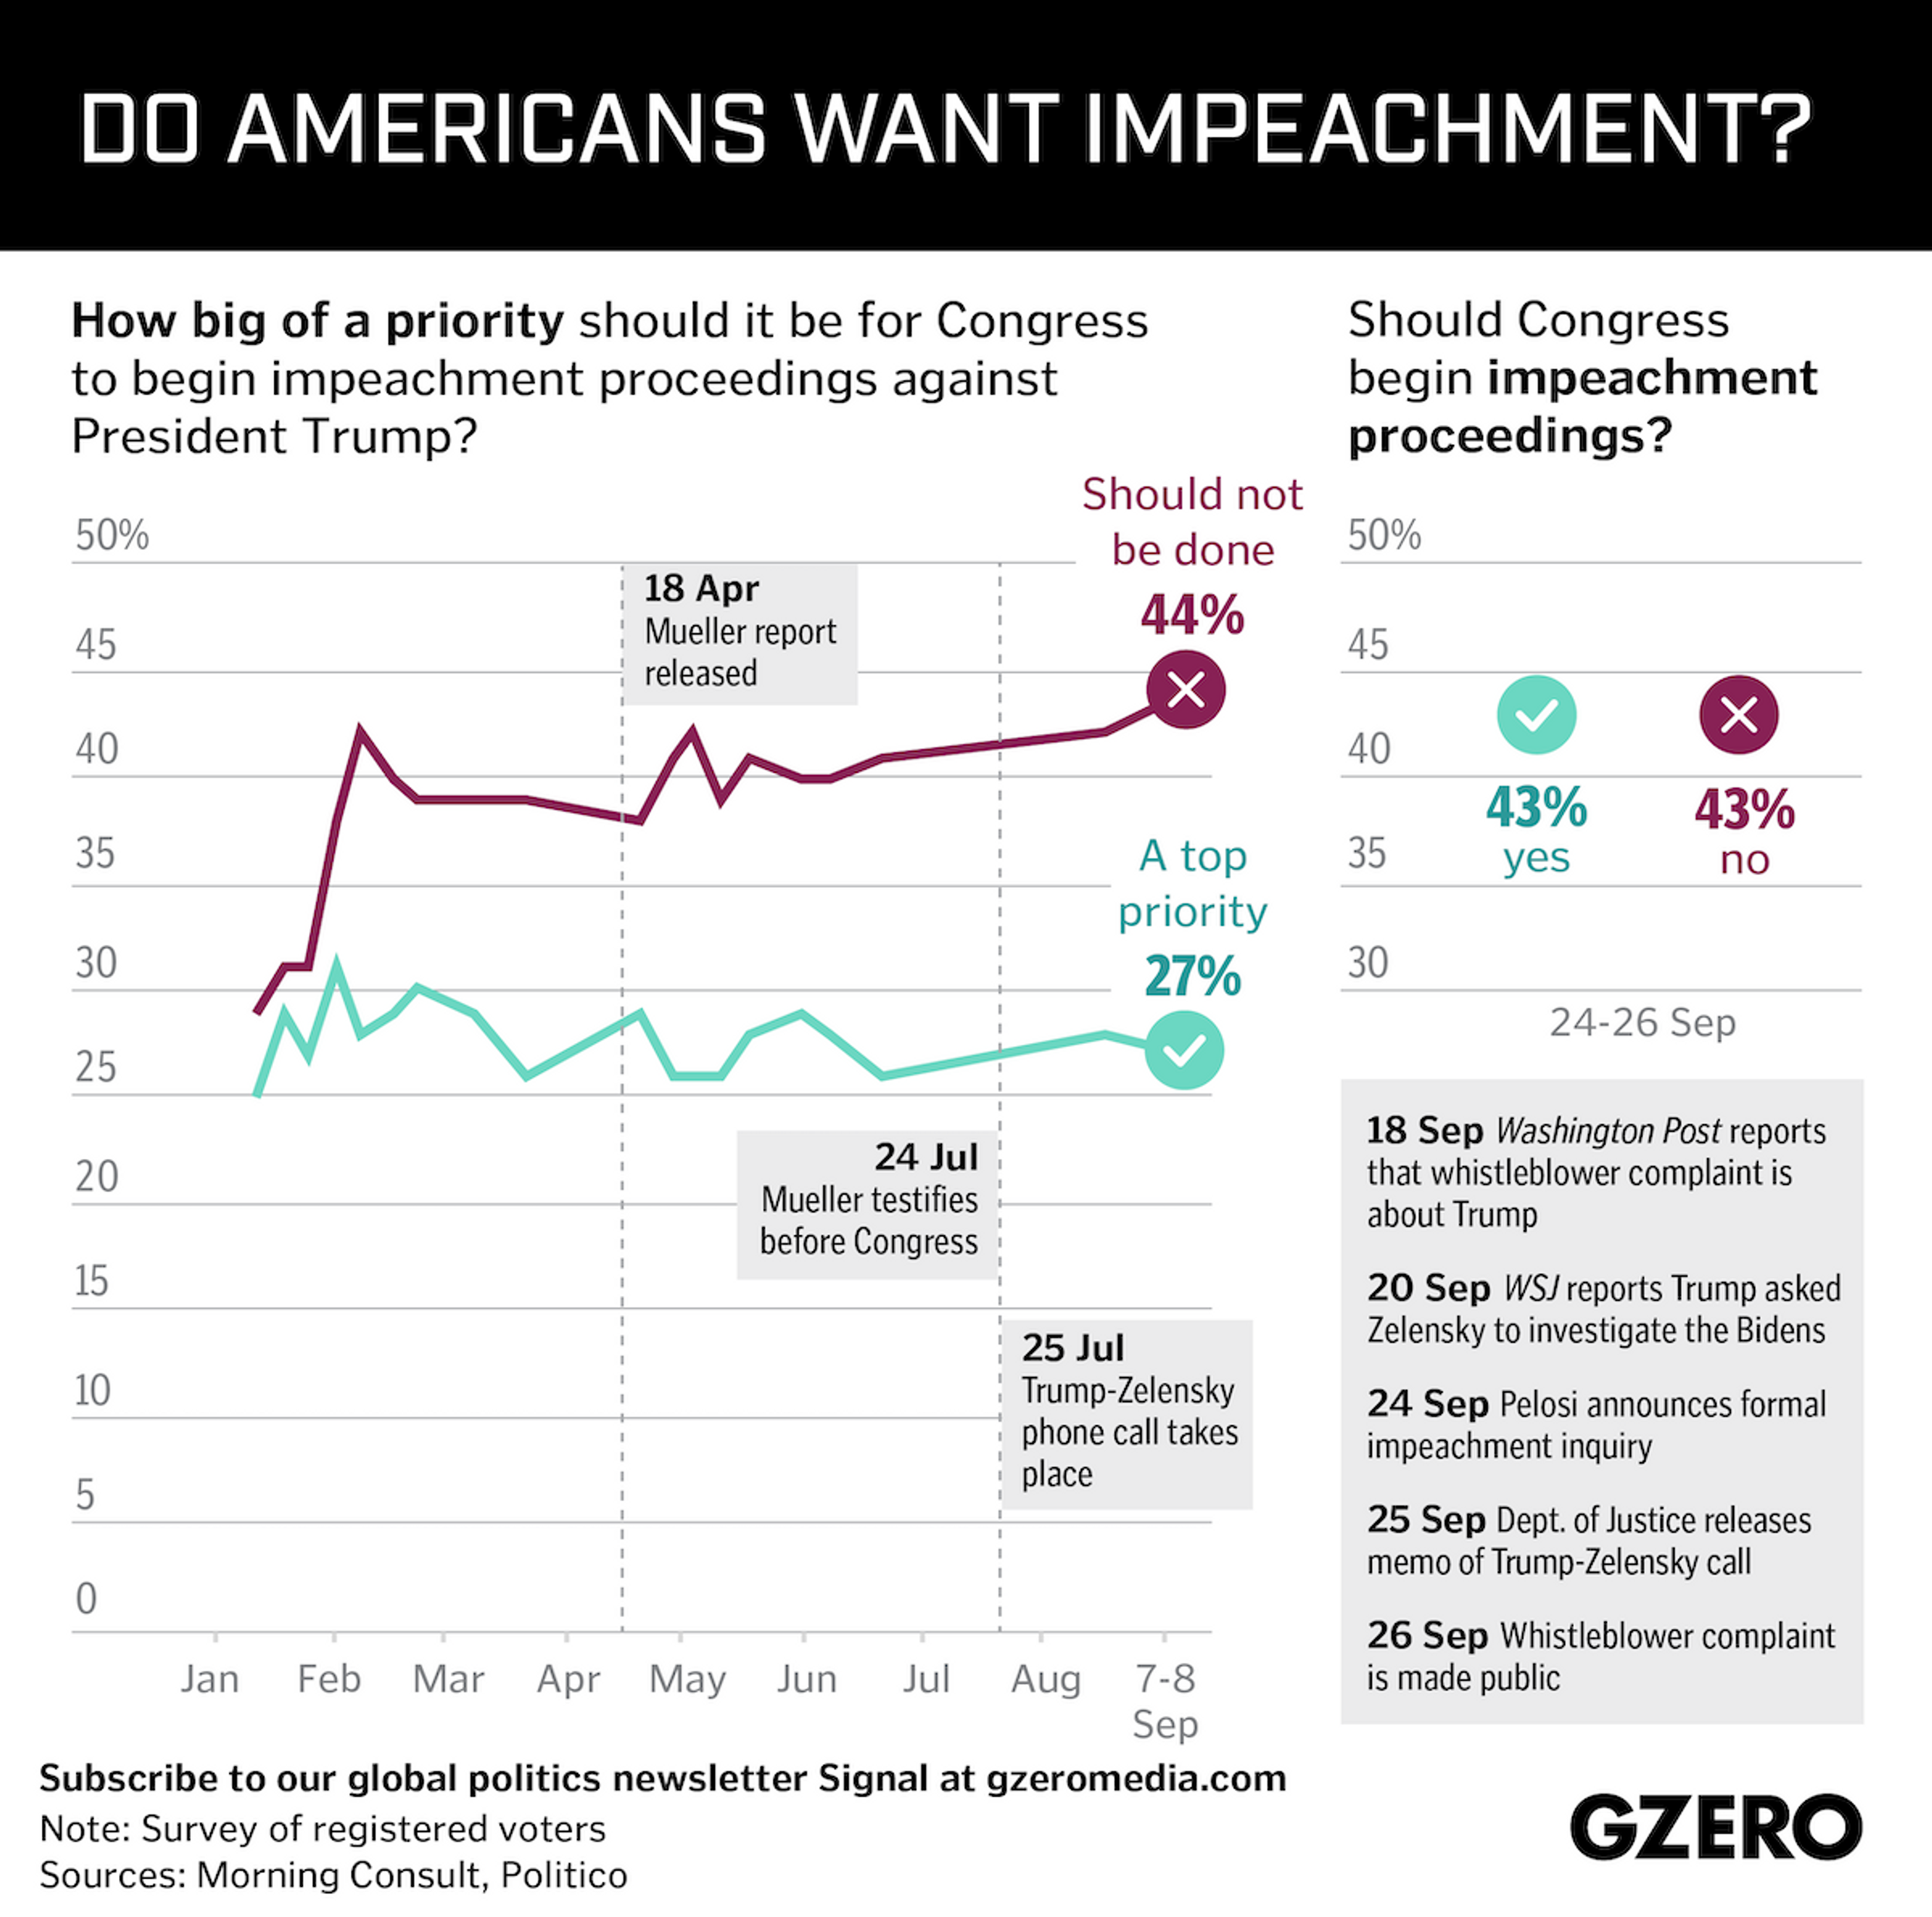 Graphic Truth: Do Americans Want Impeachment?